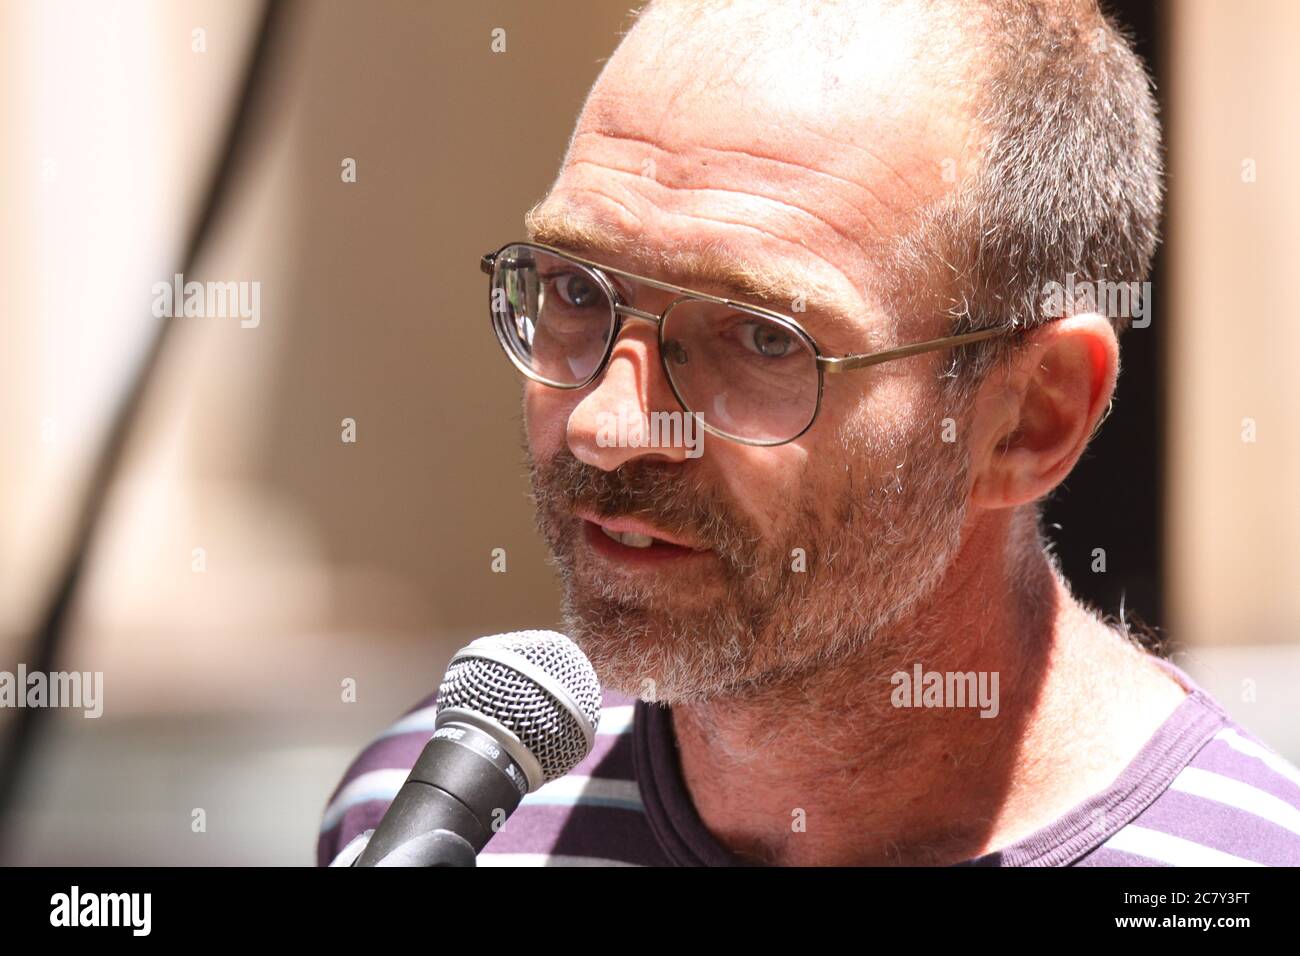 Activist David Burgess who became famous after painting a ‘No War’ message on the Sydney Opera House in 2003 speaks at the rally against war in Iraq a Stock Photo